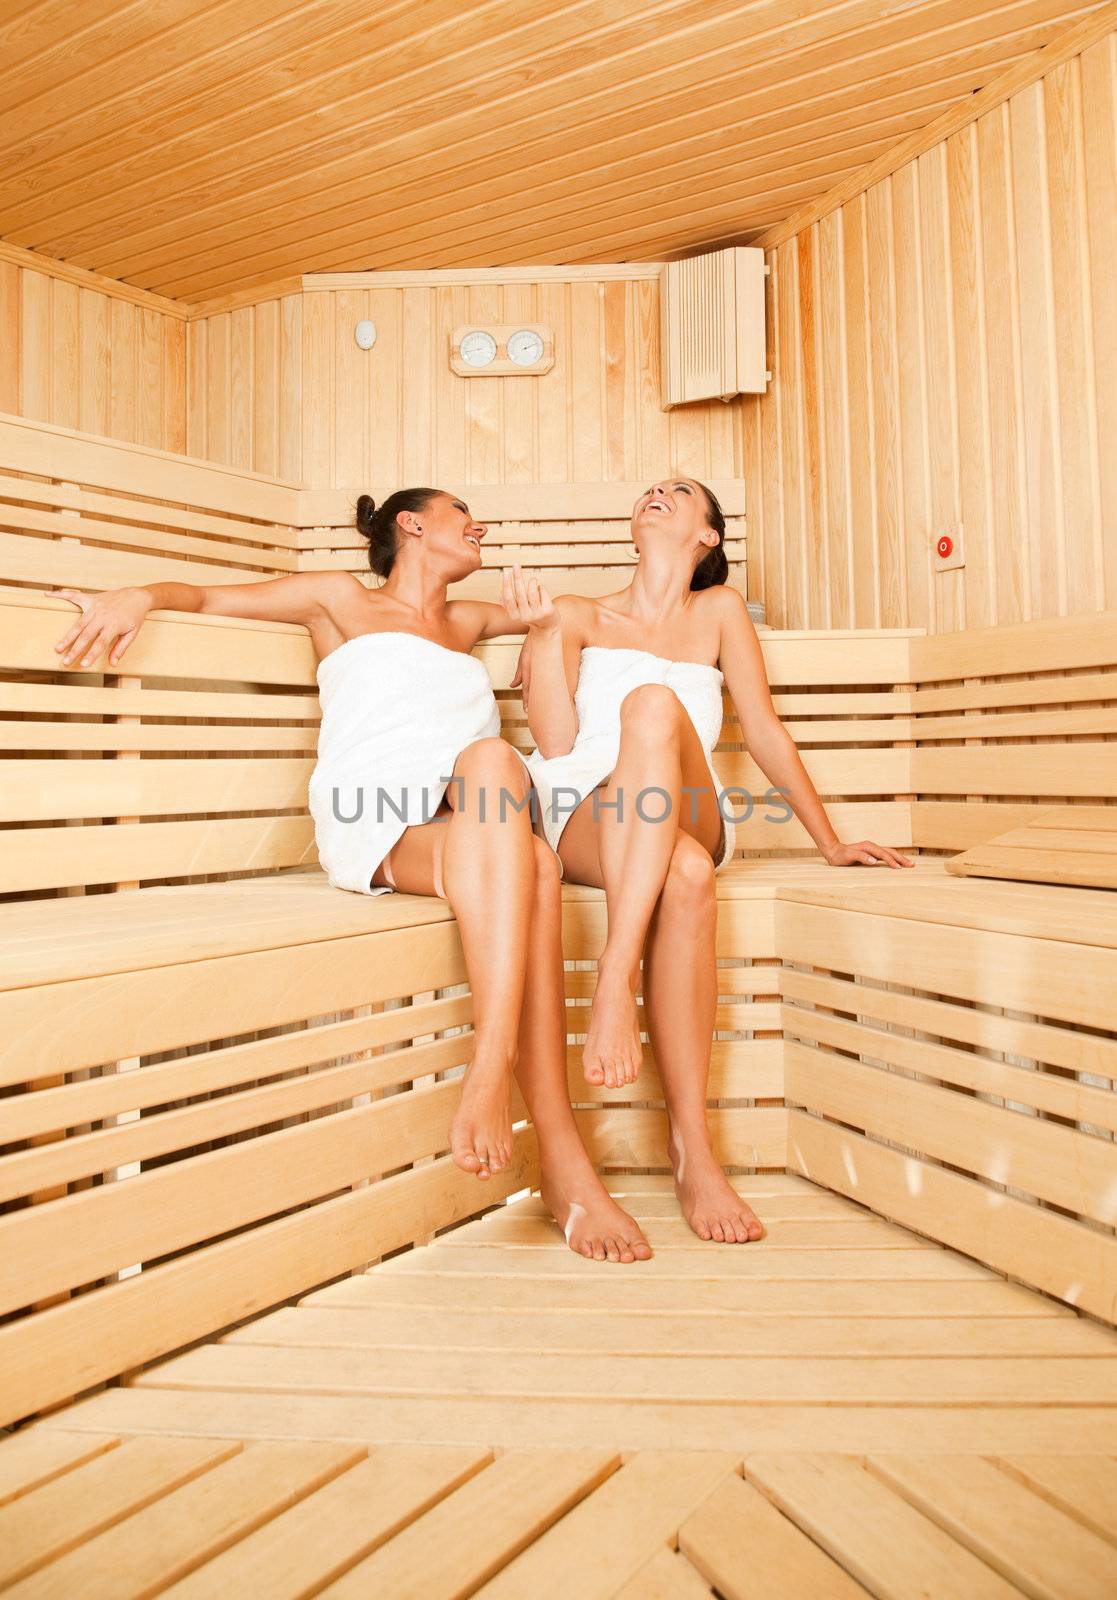 Two beautiful females with towels relaxing at sauna chatting and laughing